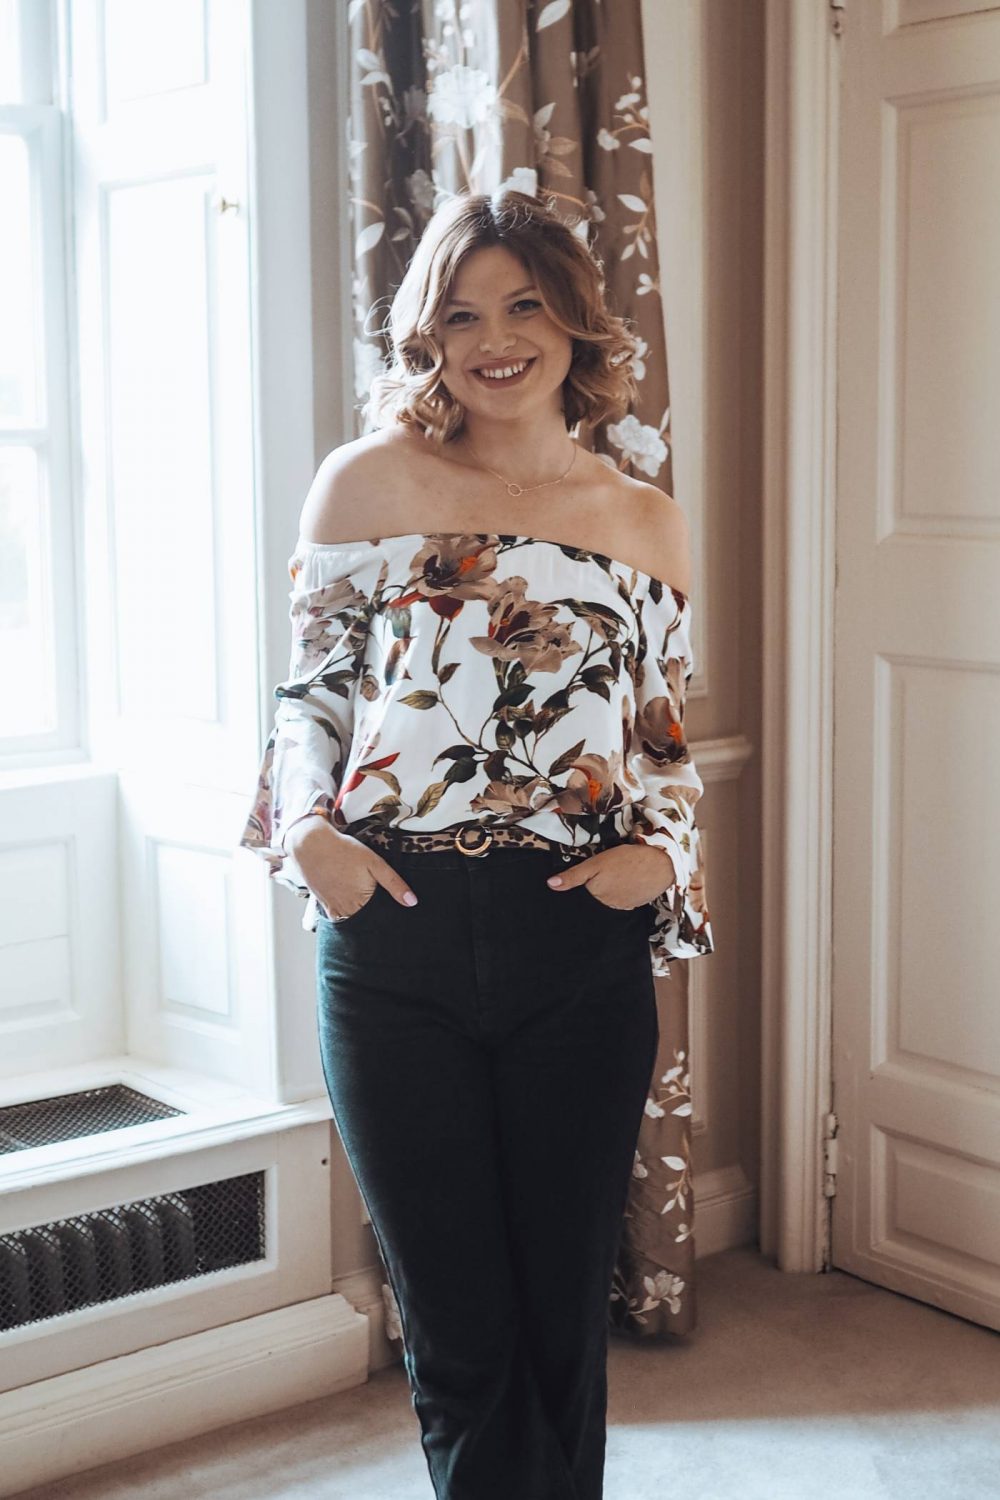 Sophie wearing a floral off the shoulder blouse in her room at Chicheley Hall